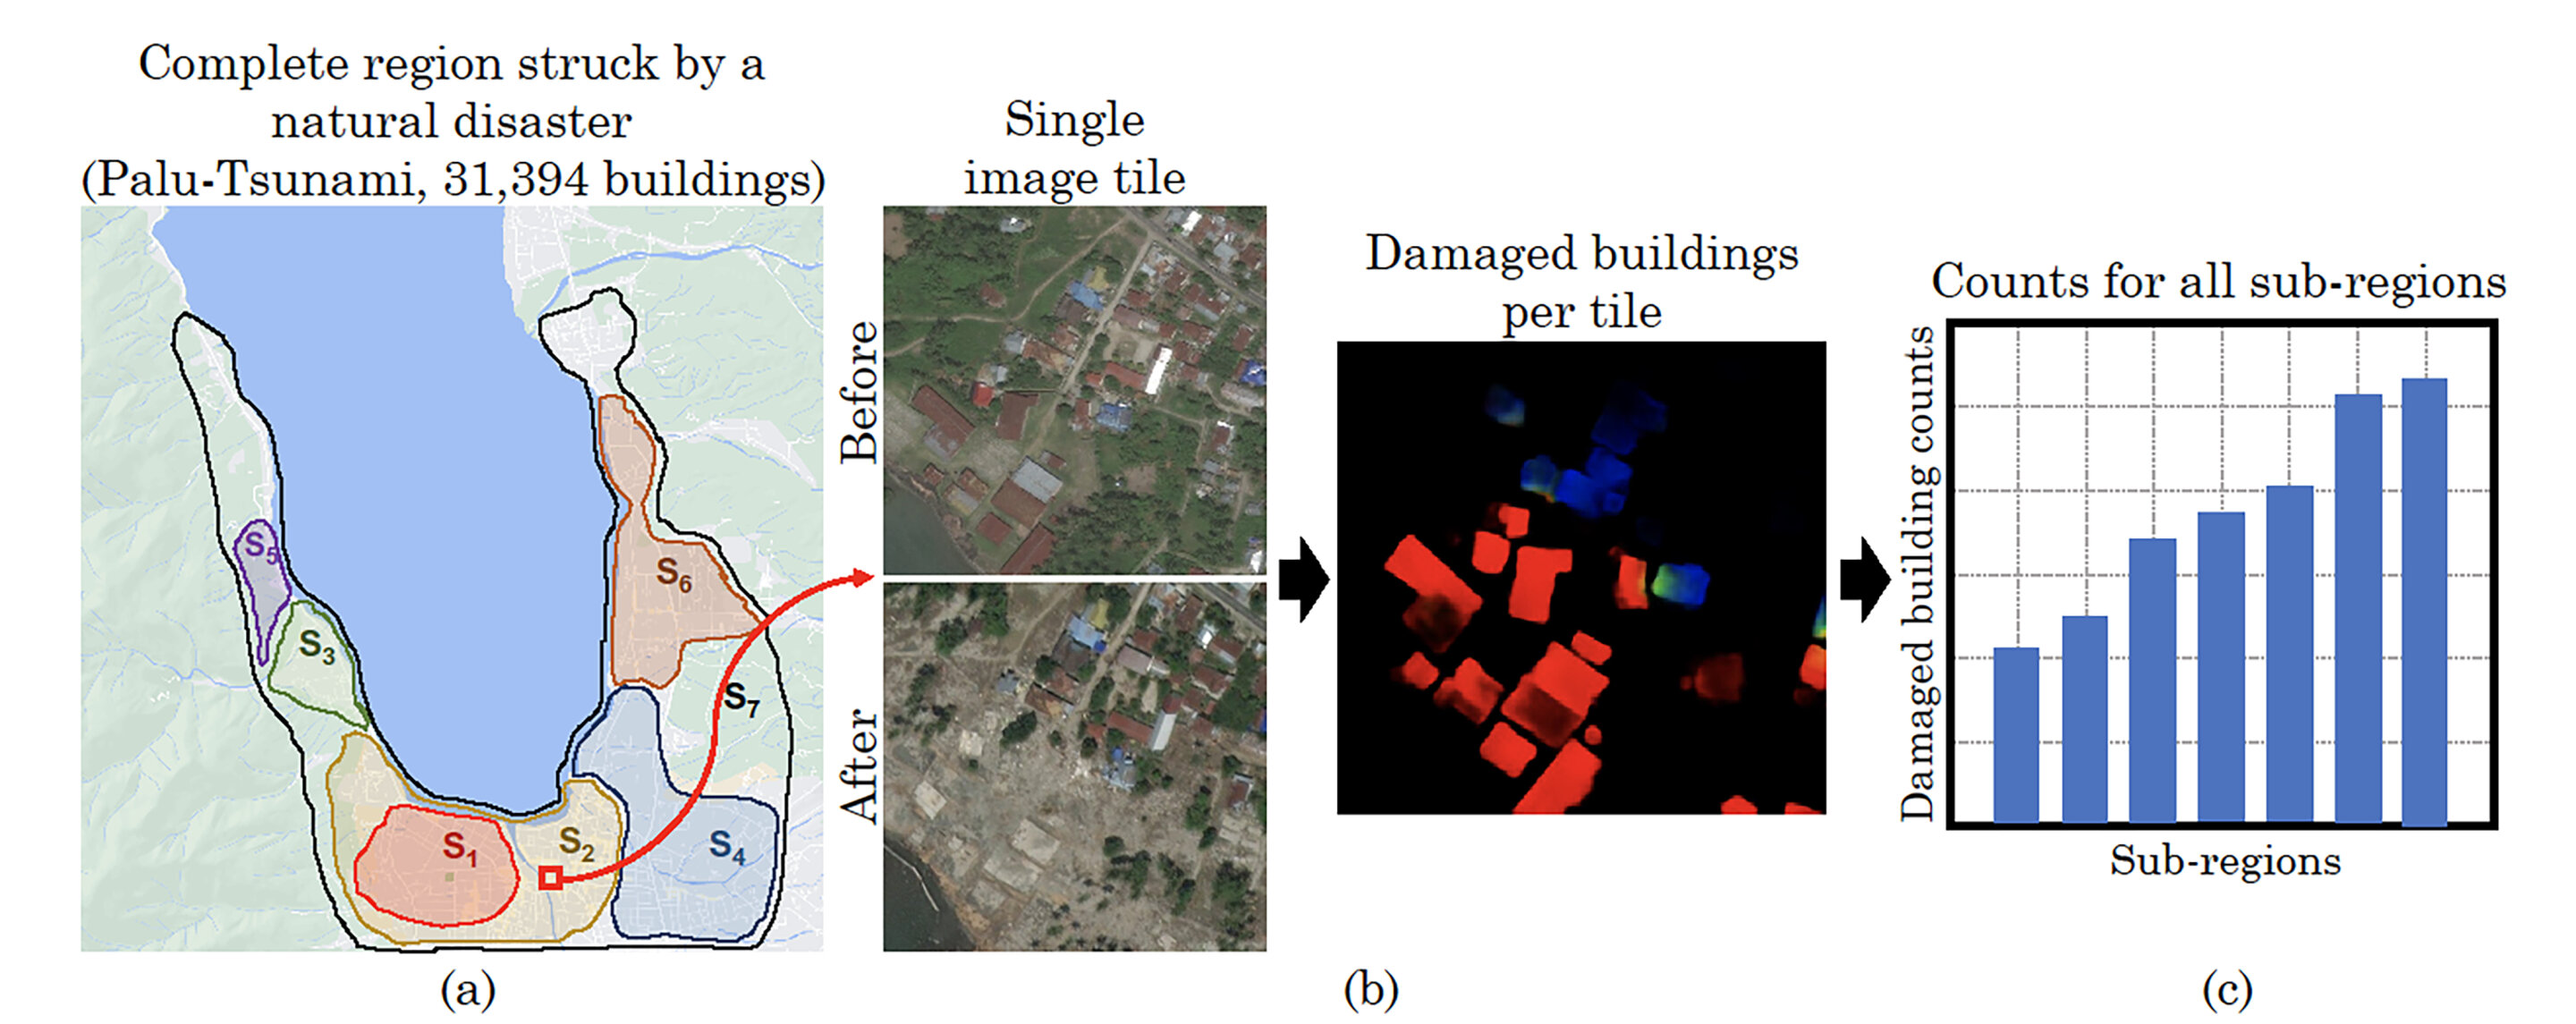 New computer vision tool can count damaged buildings in crisis zones and accurately estimate bird flock sizes